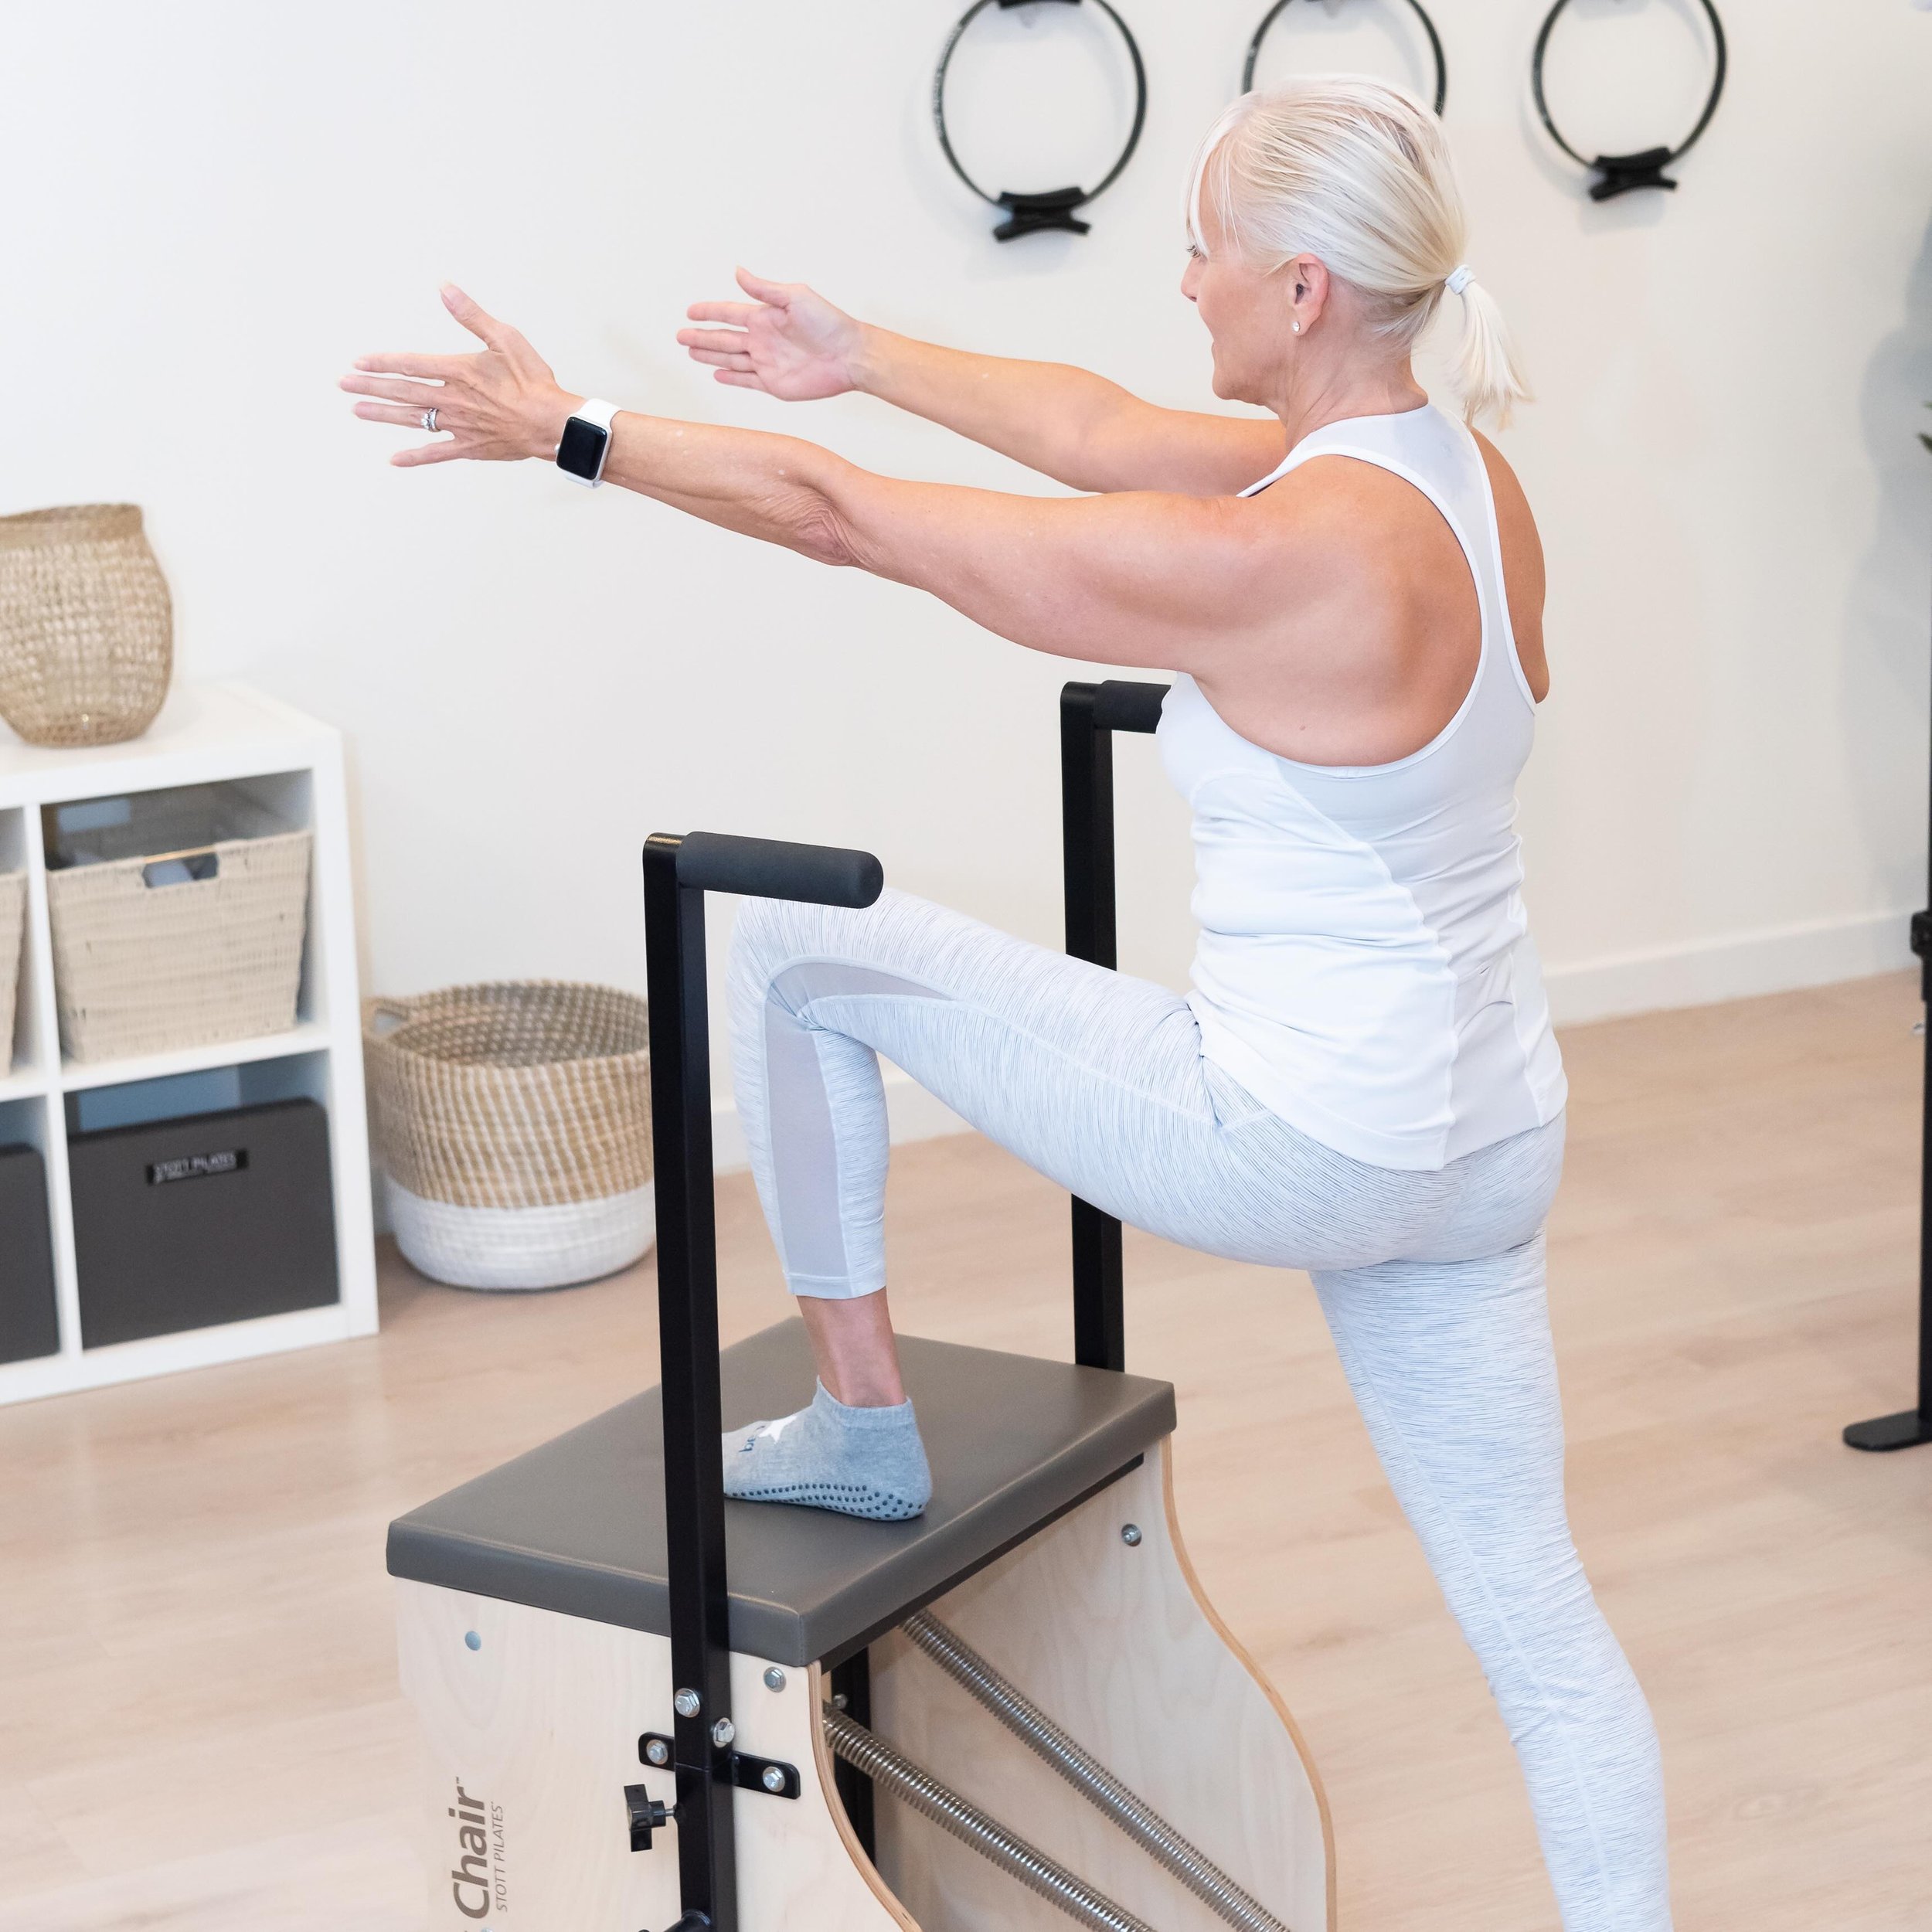 Fun fact: Joseph Pilates believed in the power of breath control so much that he dedicated a special apparatus to it called the Breath-a-cizer! Check out our stories for more intriguing Pilates tidbits! 💨

 #PilatesFacts #DiscoverMore